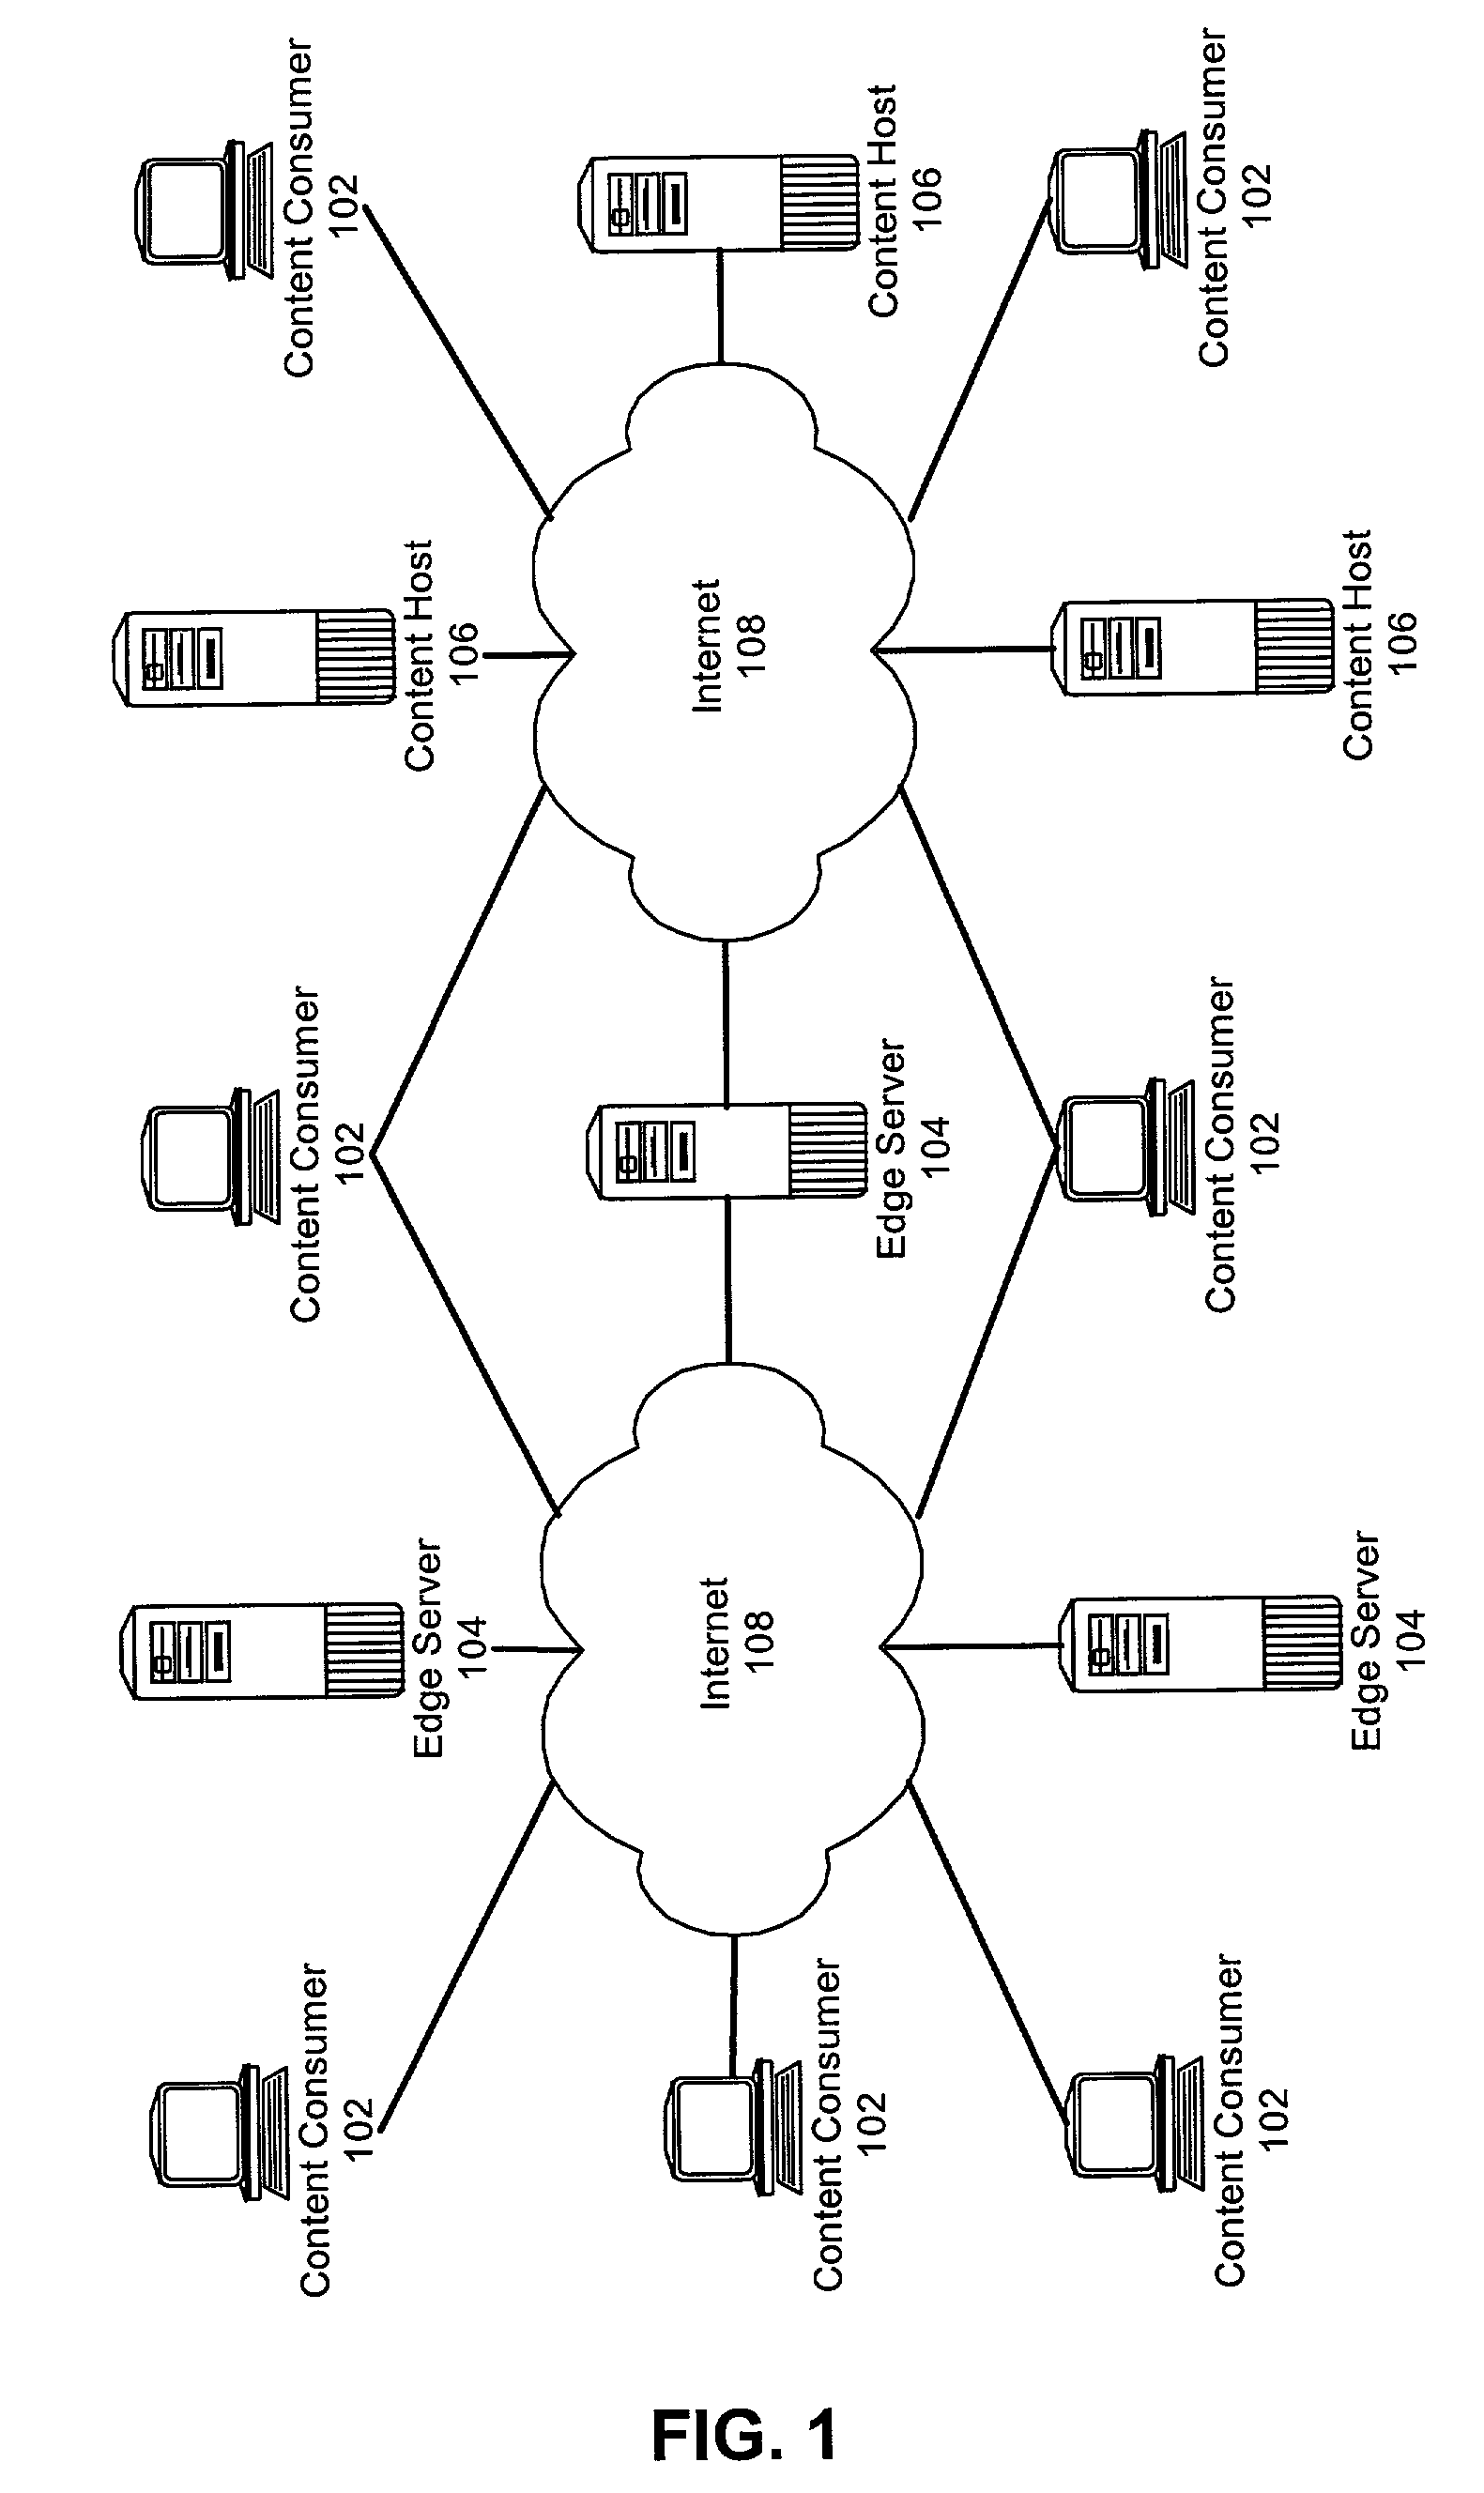 Multi-tier service level agreement method and system